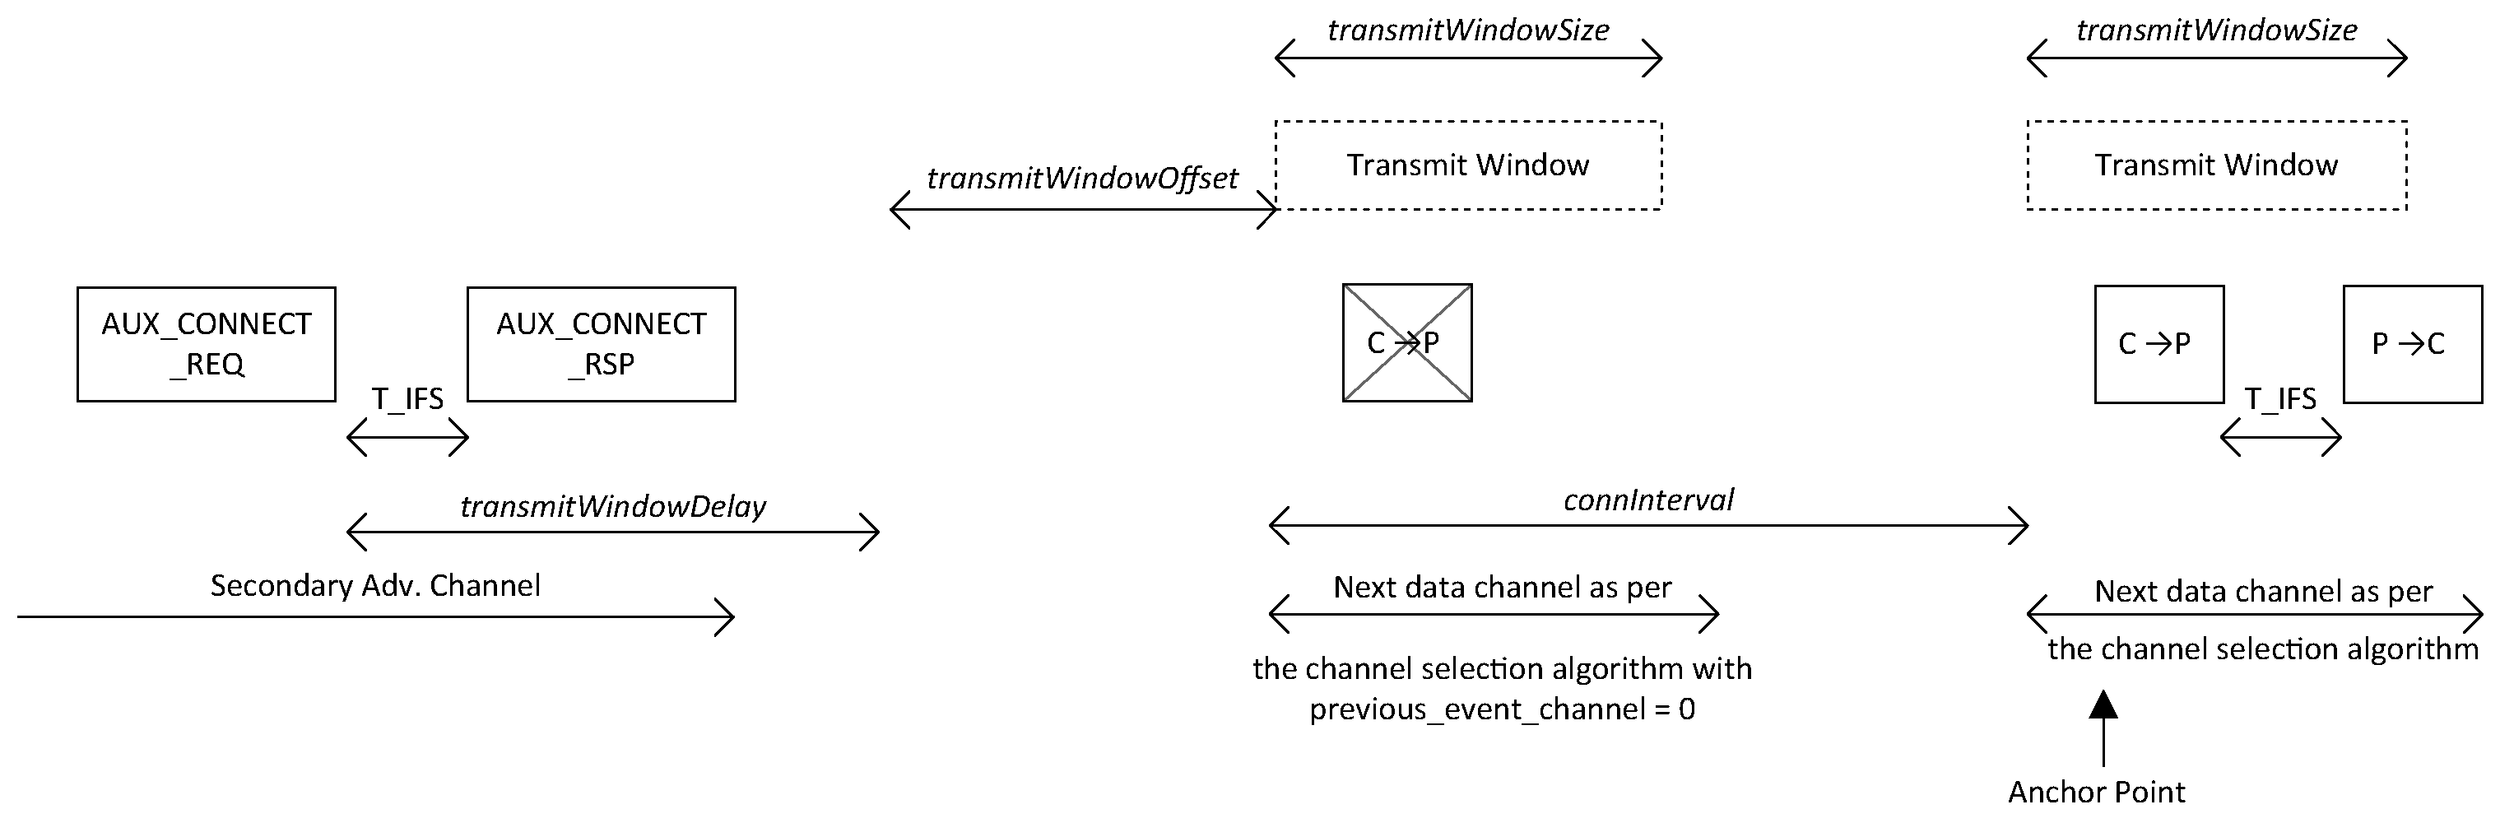 Peripheral closing LL connection setup in the second LL connection event with AUX_CONNECT_REQ